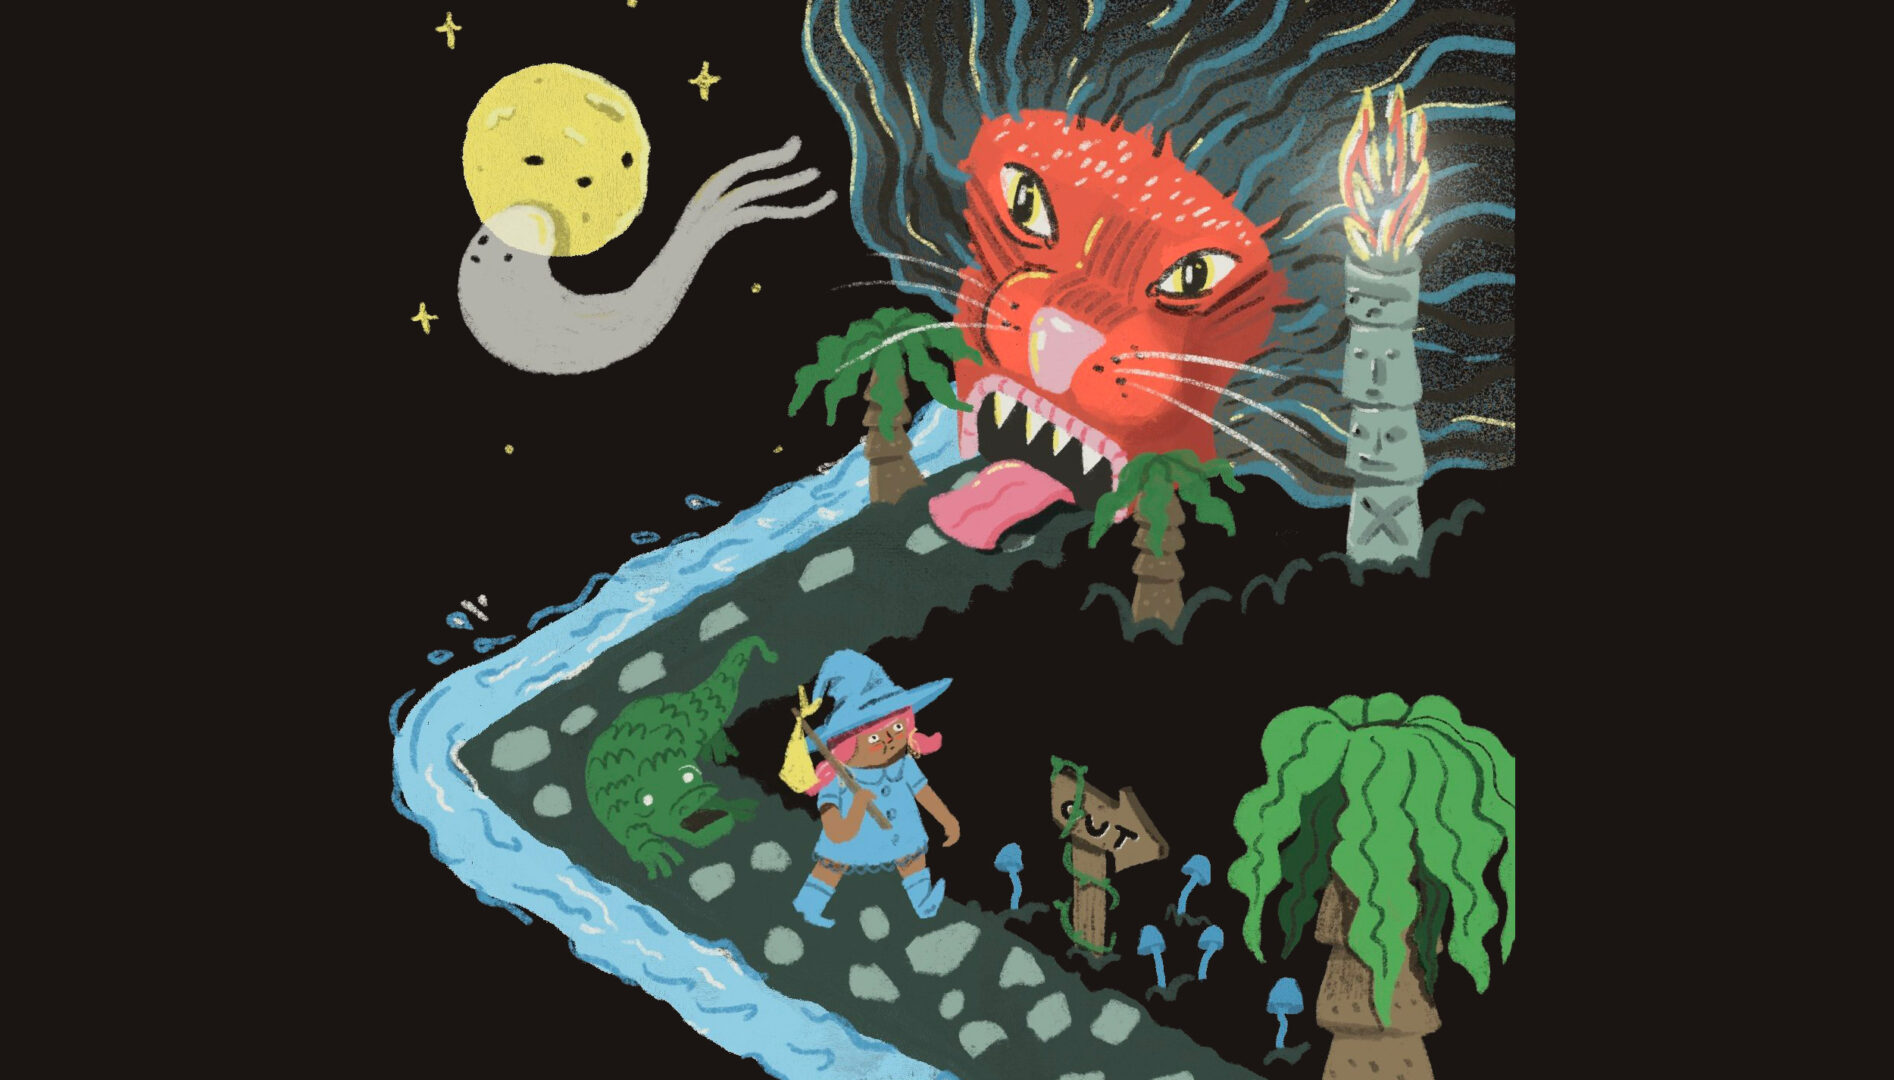 Illustration of a red-faced lion-like creature with fangs and a road leading into its mouth. On the path a girl with pink hair and a blue dress and witch's hat is being followed by a green crocodile. A black background has yellow stars, a yellow moon, and a ghost floating by the moon.